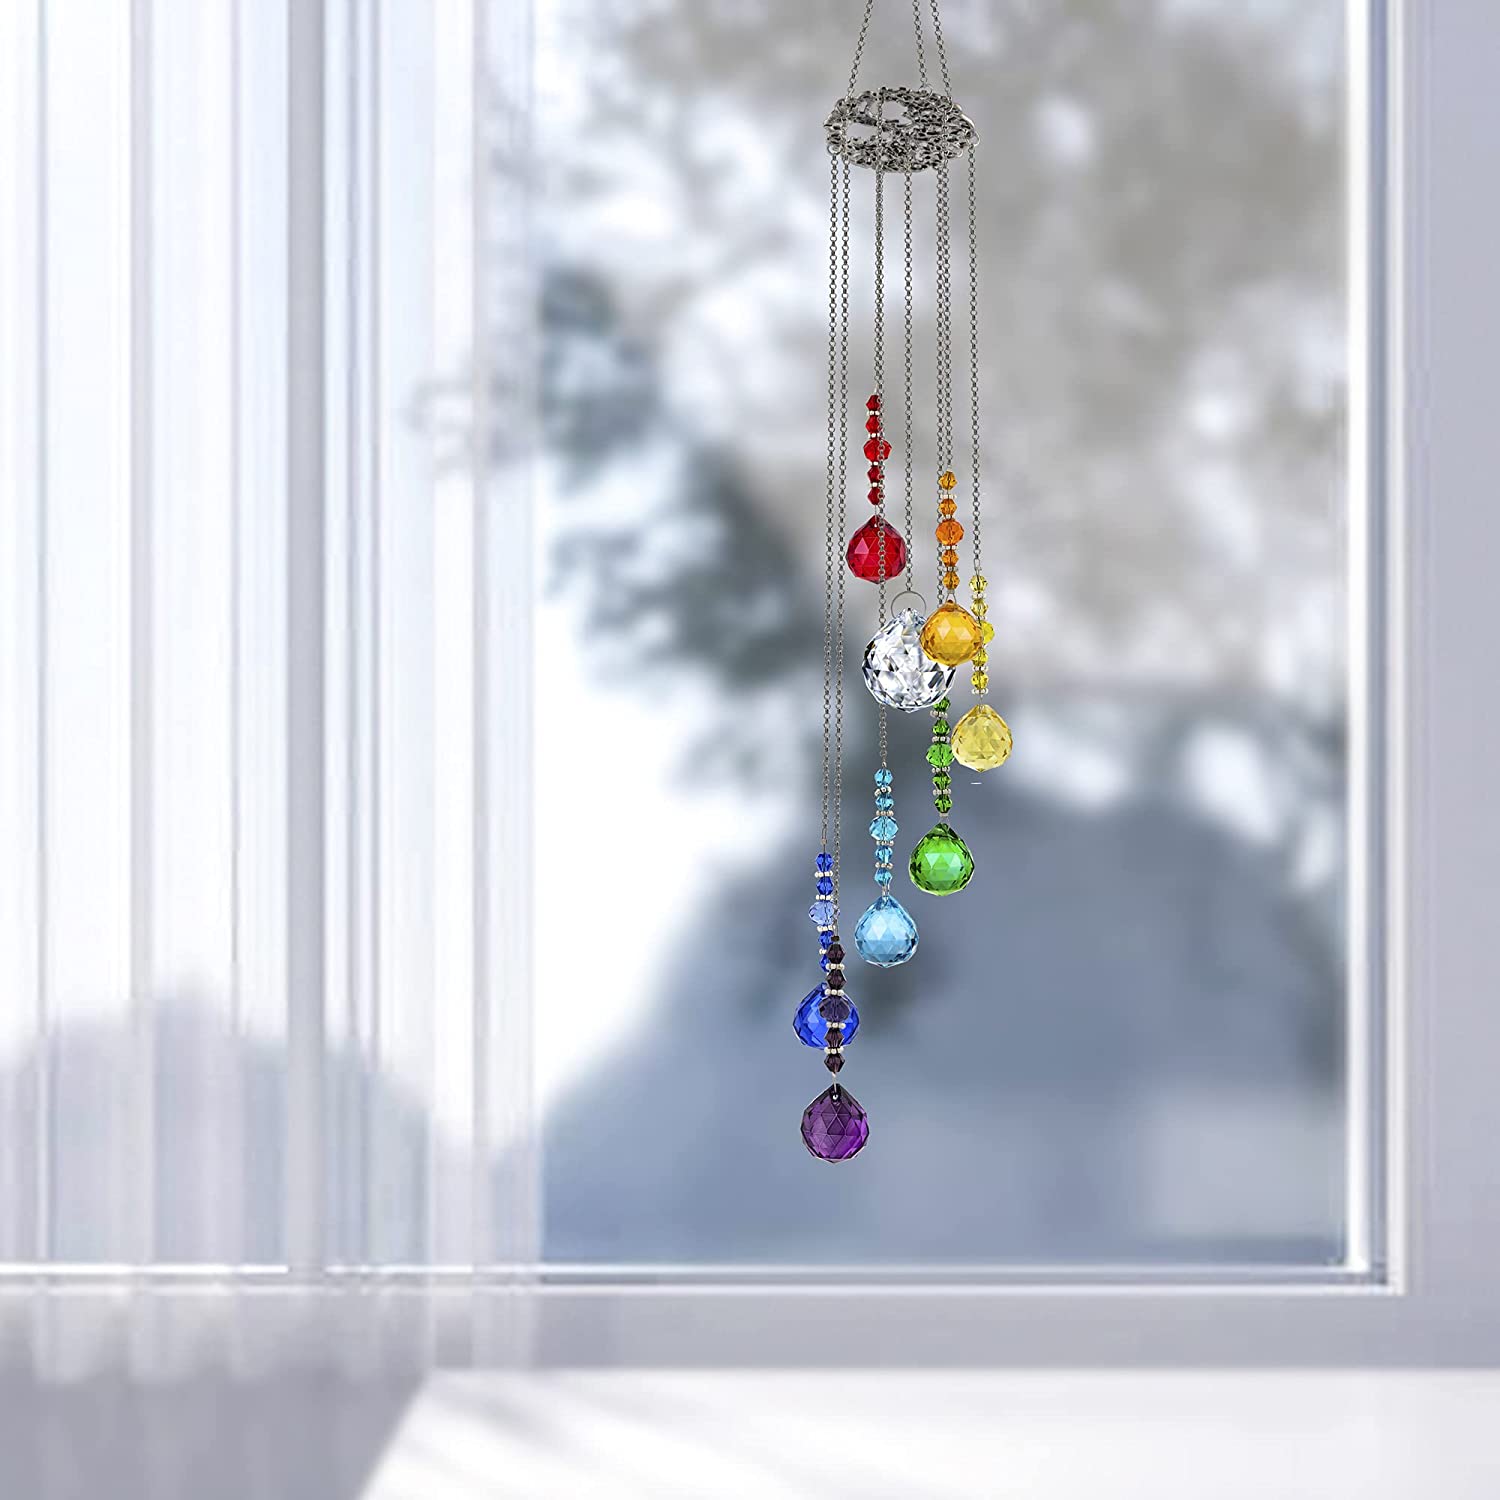 Colorful Crystal Ball Prisms Suncatcher Tree of Life Window Hanging Pendant for Home Holiday Decorations Christmas Tree Decor